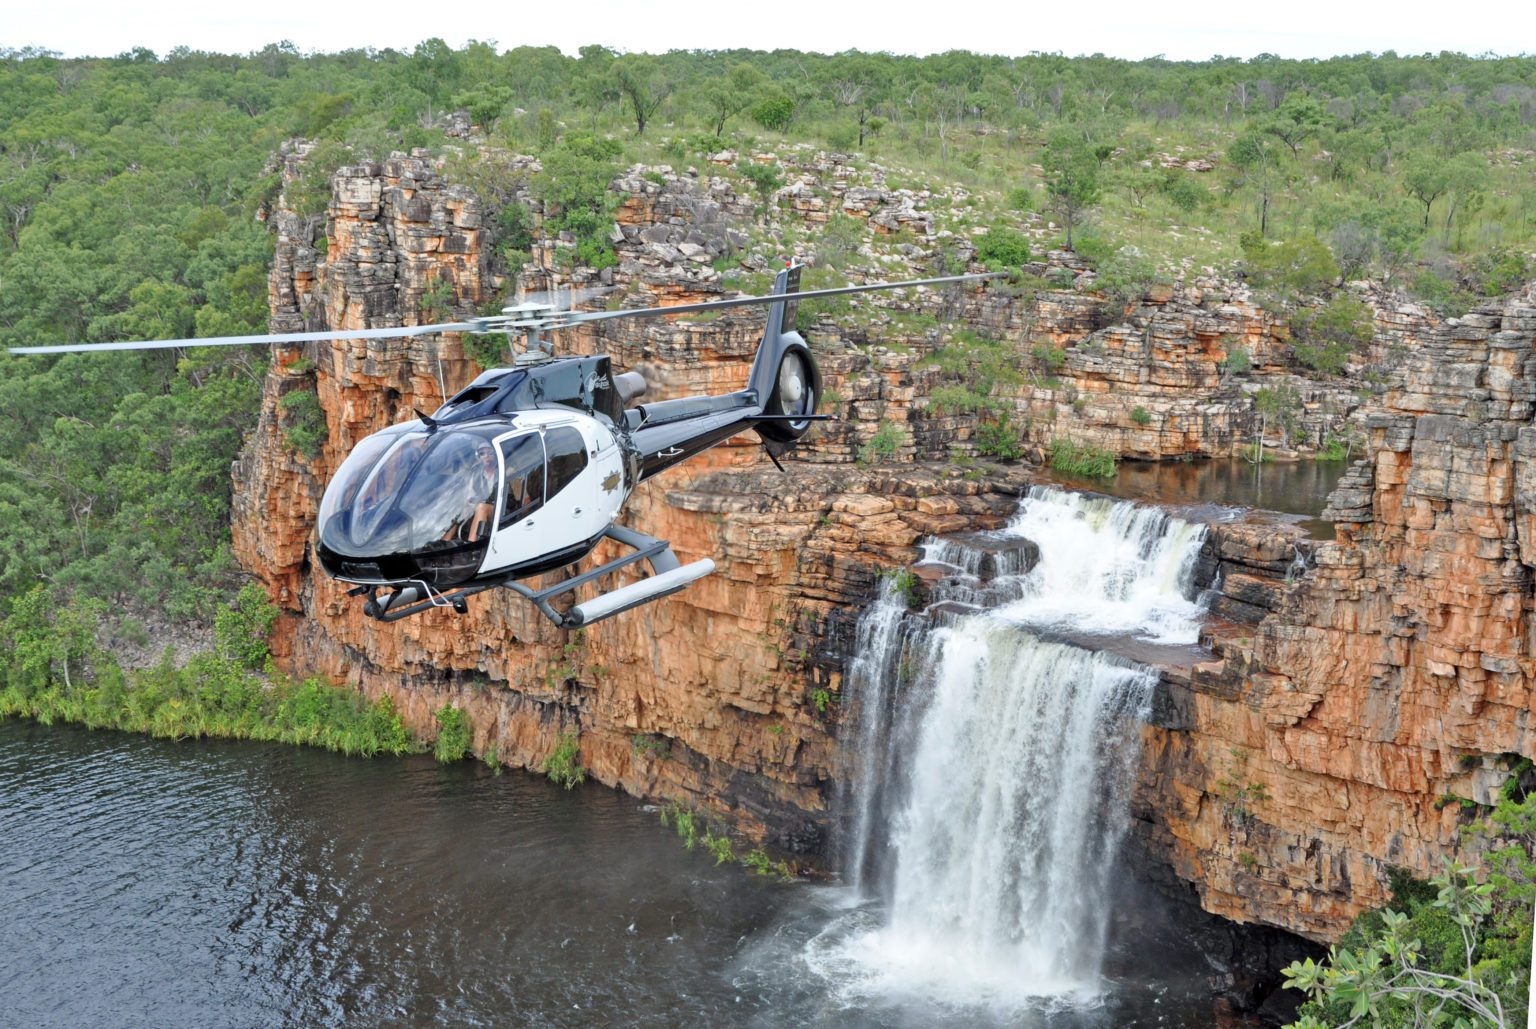 A helicopter flies above a waterfall in Kimberley